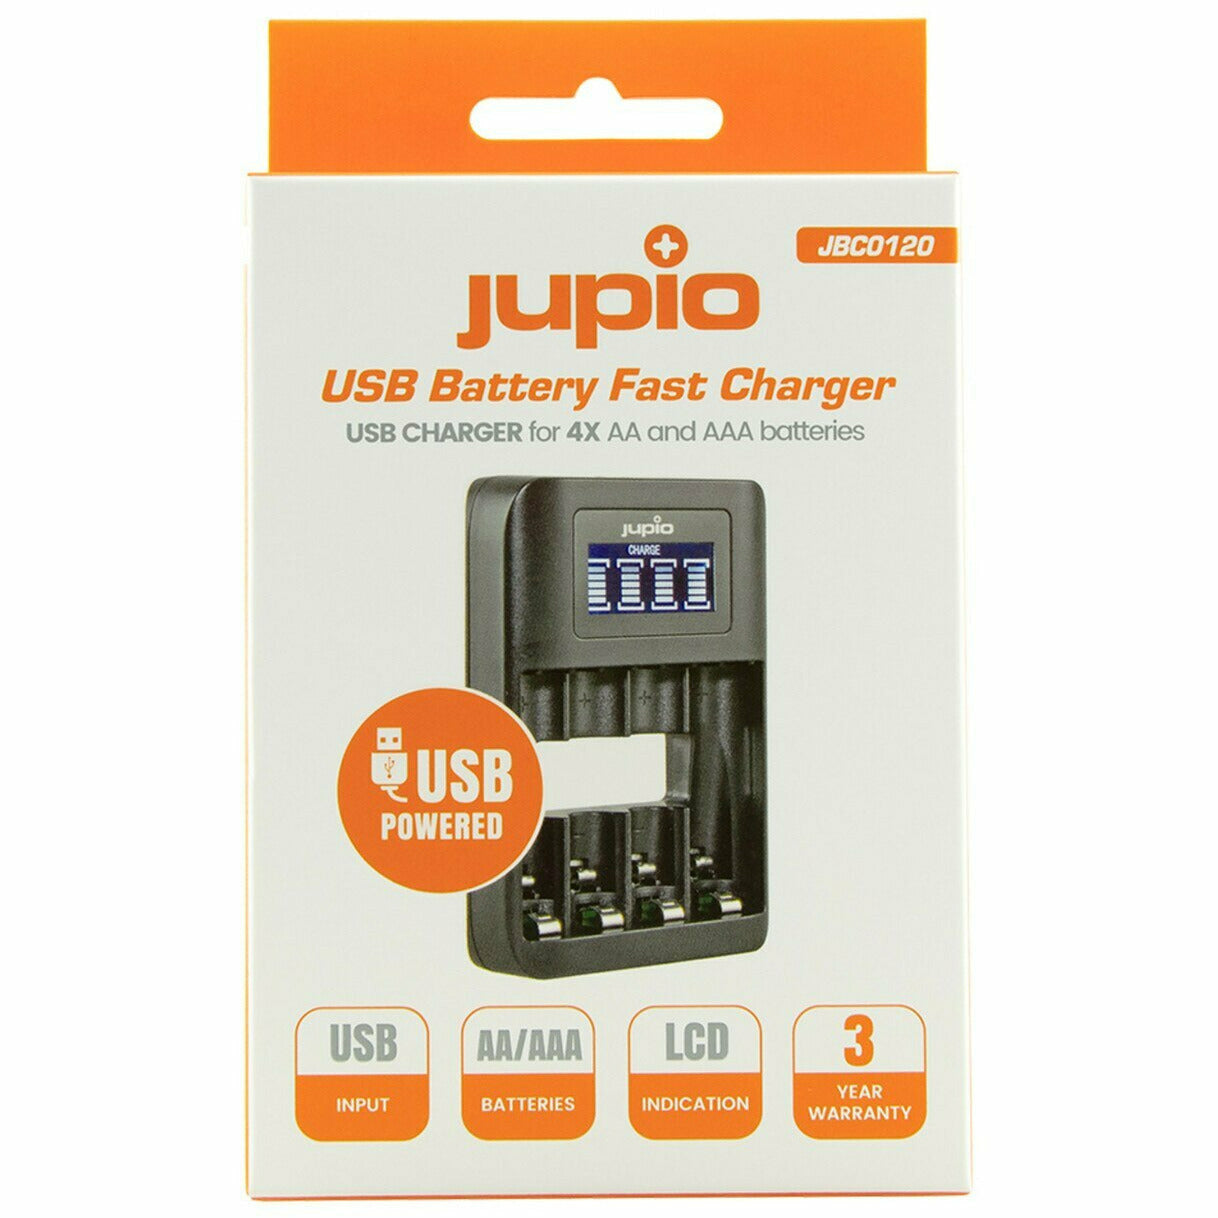 Jupio 4 Slot Rechargeable AA & AAA Batteries with USB Fast Charger & LCD Screen - Dragon Image